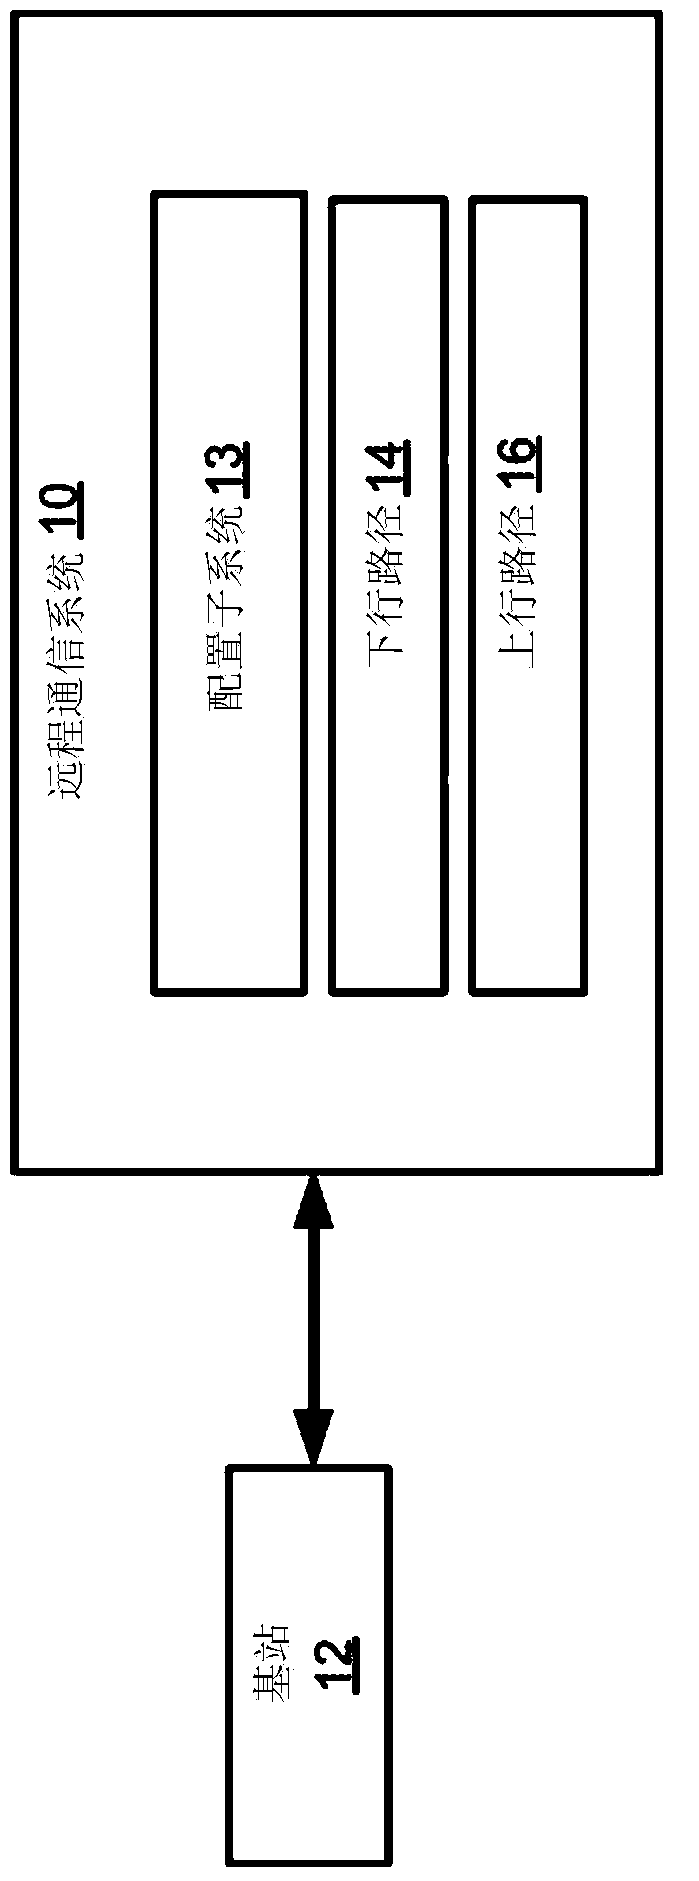 Configuration sub-system for telecommunication systems